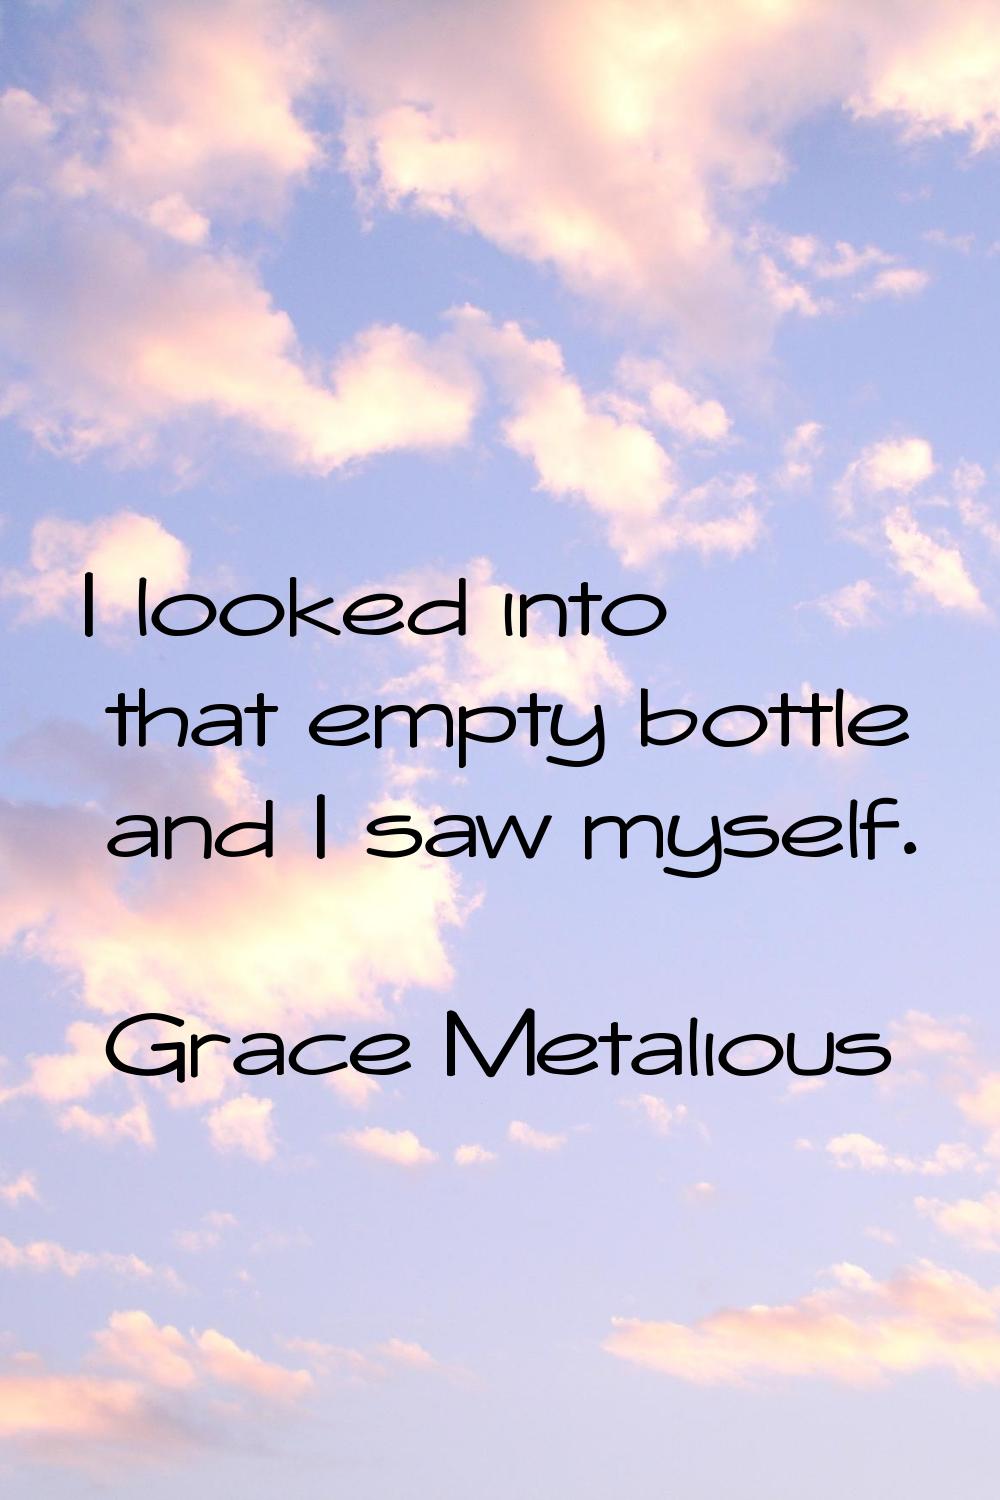 I looked into that empty bottle and I saw myself.